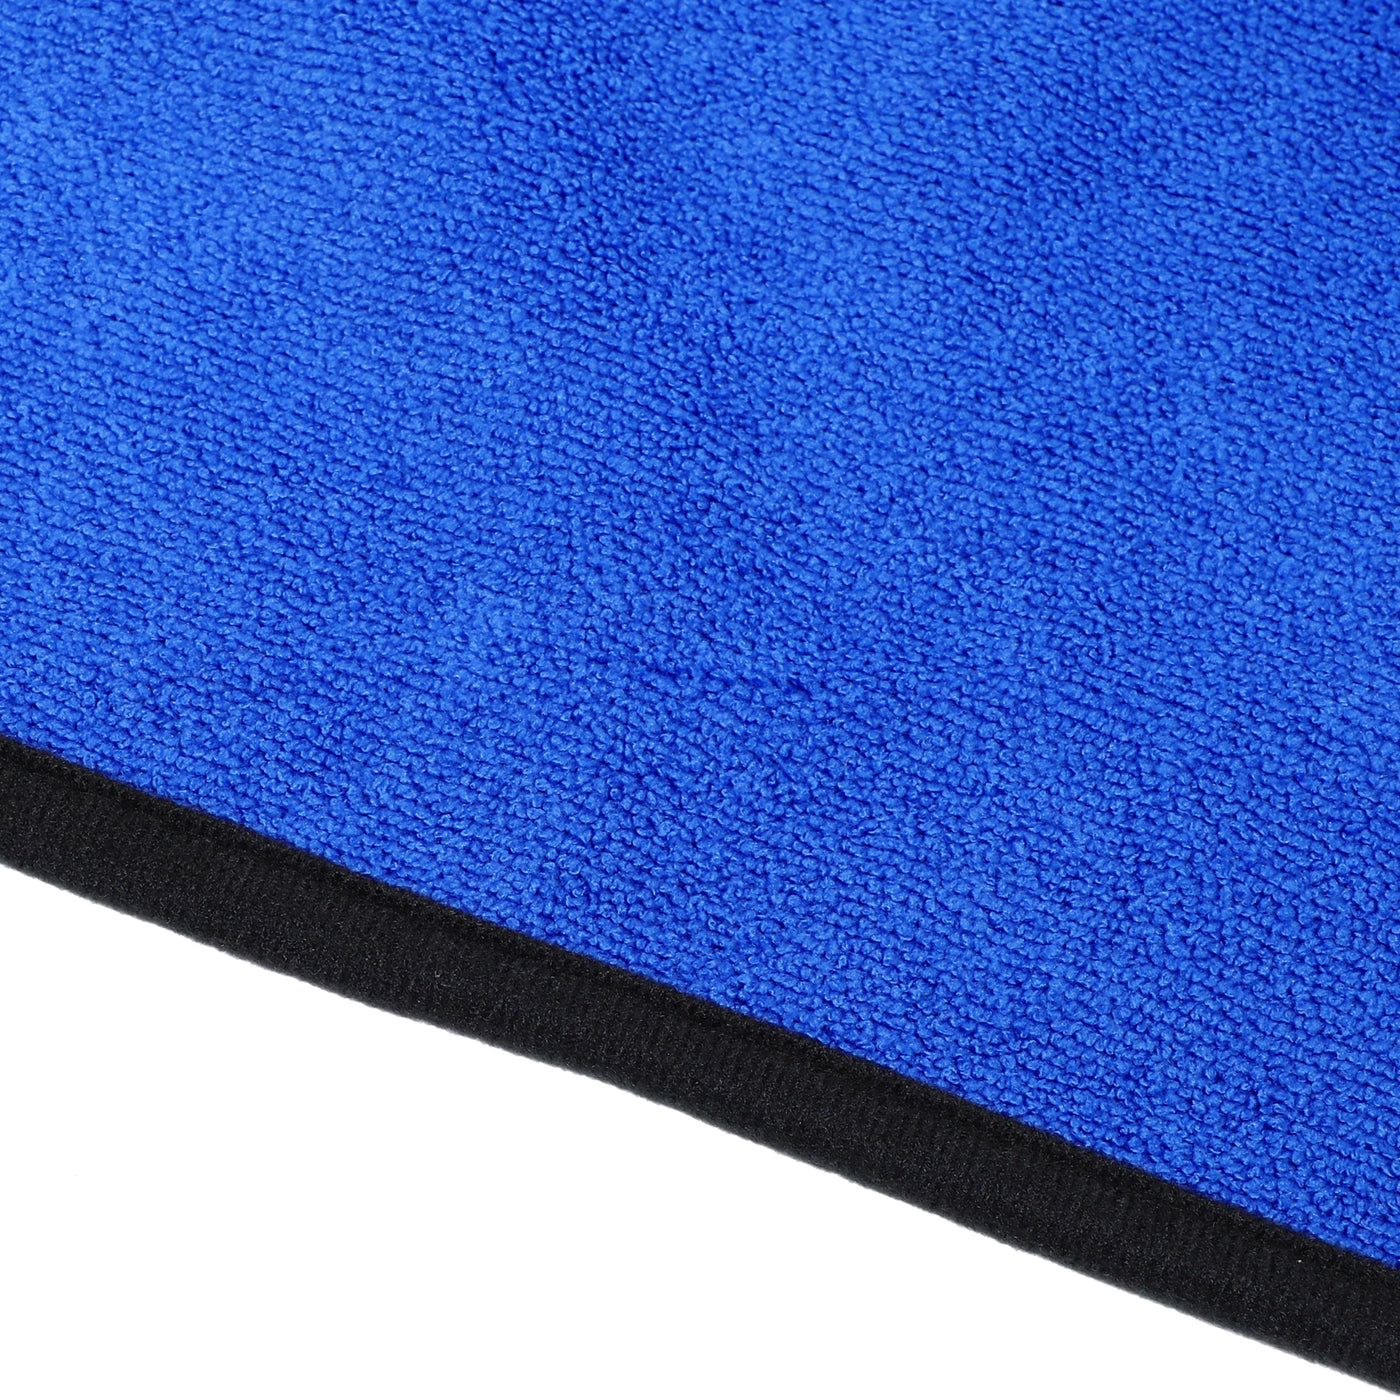 X AUTOHAUX Blue Universal Car Seat Cover Anti-Slip Towel Seat Protector Pad for Car Trucks SUV